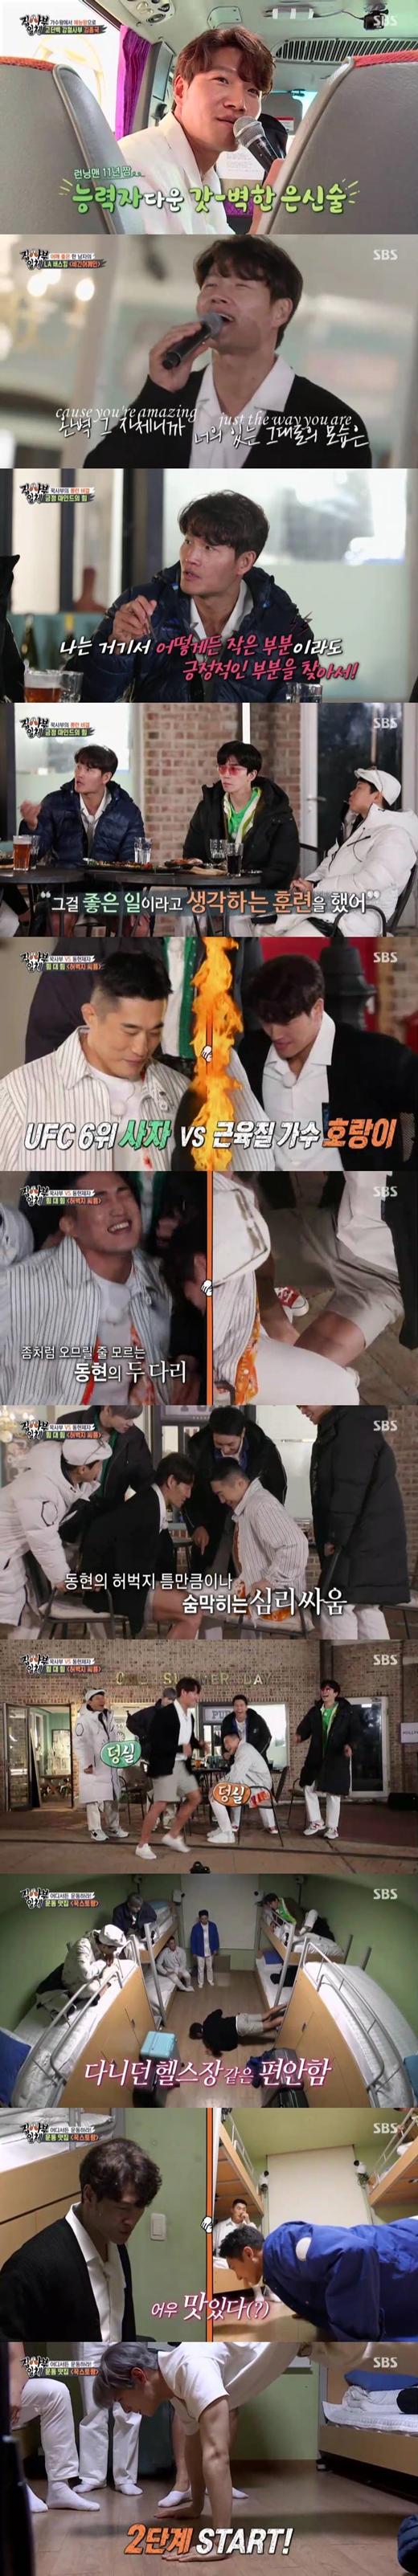 SBS All The Butlers Icon of Power Master Kim Jong-kook and Kim Dong-Hyun won the best one minute with the fun of watching the power confrontation.According to Nielsen Korea, a ratings agency on the 19th, the ratings of All The Butlers in the metropolitan area, which was broadcast on the 18th, were 4.6% in the first part and 5.4% in the second part.The topic and competitiveness index, the 2049 Target Viewing Rate, rose to 2.4% and the highest audience rating per minute rose to 6.3%.On this day, Kim Jong-kook appeared as a master, and he was shown leaving a special travel with All The Butlers Lee Seung-gi, Yang Se-hyeong, Shin Sung Rok, Cha Eun Woo and Kim Dong-Hyun.On this day, the members climbed on a chartered bus prepared by the master while wearing a vacation look.The bus is decorated like a plane, from windows to announcements, so that members can actually feel the feeling of leaving Travel.Then, Master Kim Jong-kook made a surprise appearance and cheered the members by singing One man and There is a master, I love you so much.Kim Jong-kook said, Todays destination is LA, and said he prepared a substitute satisfaction Travel for viewers who could not go to Travel.Since then, Kim Jong-kook and members have arrived in the English village in Paju, Gyeonggi Province.Members entered the Savood rather than Hollywood, and started a special travel.Kim Jong-kook said, How much did you speak English? I did the whole connect the dot to dot - ABC learned to read an about 30.Kim Jong-kook said, I always carried my mother with Travel.I was so anxious and disliked that I could not get to English if I did not speak English, and I was in a disadvantaged and dangerous situation. He said that he started the Connect the dot to dot - ABC long to read an.Kim Jong-kook, who has been performing SBS Sunday entertainment for 18 years from X Man to Family Out and Running Man.Kim Jong-kook said, Thank you very much. When asked about the secret of Long Run for decades, he said, If you try to do well, youre unhappy.If you think you are losing money and concessions, you are just happy. I am so happy now. If something negative happens, Ive trained myself to find some positive part of it, even a small part of it, and think its a good thing, he said, stressing a positive attitude.Lee Seung-gi said, The other thing is positive, but why is it when we lose the game? He mentioned the wrestling match between Kim Jong-kook and Kim Dong-Hyun five years ago.Kim Jong-kook and Kim Dong-Hyuns thigh wrestling revenge match was unfolded.Kim Dong-Hyun was helplessly defeated and laughed at Kim Jong-kooks time difference attack, while the two men were tense and nervous before the start.On this day, the fierce pride battle between Kim Jong-kook, a talented person in the power-to-power entertainment world, and Kim Dong-Hyun, a UFC legend, caught the attention of viewers and won the best one minute with 6.3% of the audience rating per minute.Kim Jong-kook, who returned to the hostel after that, said, When I go to LA, I tear it before bed.I see the terrain of the hostel wherever I go, he said.Kim Jong-kook then pulled up the stairs with Lee Yong and gave an admiration.Lee Seung-gi, who watched this, laughed, saying, I did not make you do that stairs, and Is muscle so necessary in real life?Starting with Lee Seung-gi, the members also challenged the push-up.Kim Jong-kook, who was giving exercise tips to members, laughed at the members by admiring them as delicious instead of good.Yang Se-hyeong tried to quit the exercise, saying, Is it salty? But the members laughed because they did not let him go, saying Lets eat dessert.